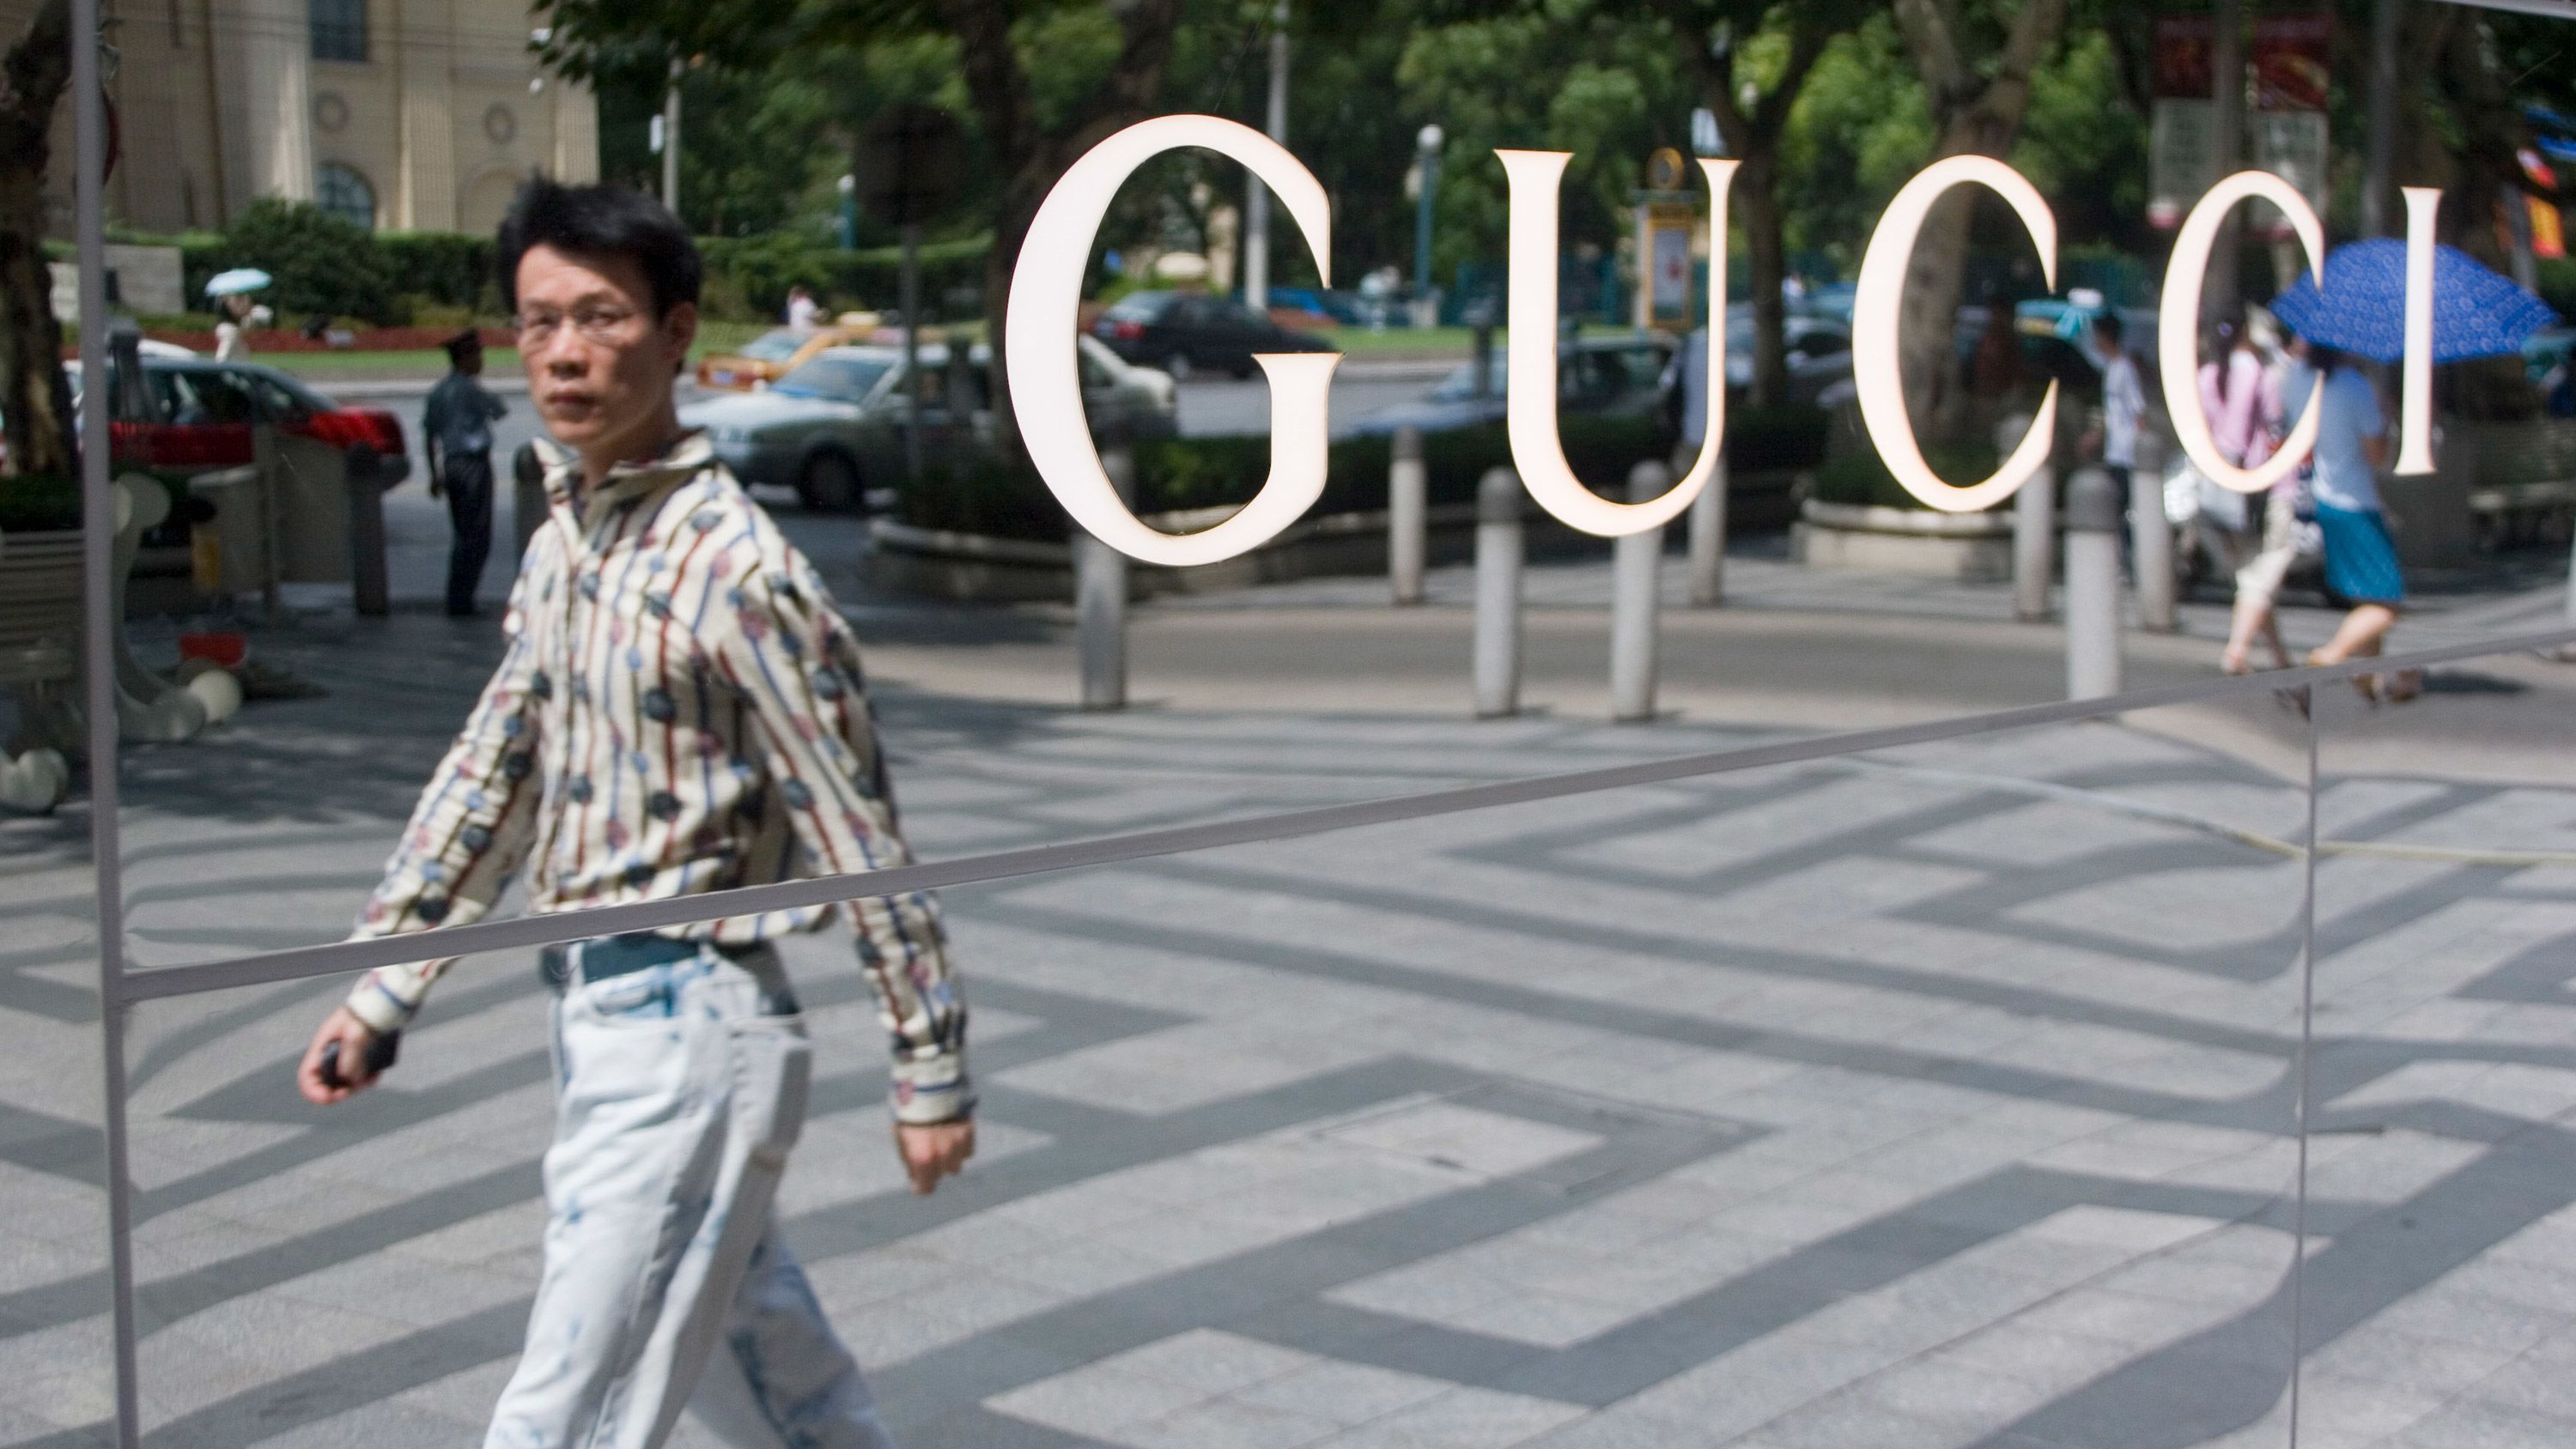 Kering: Too Expensive And Too Dependent On Gucci (OTCMKTS:PPRUY)